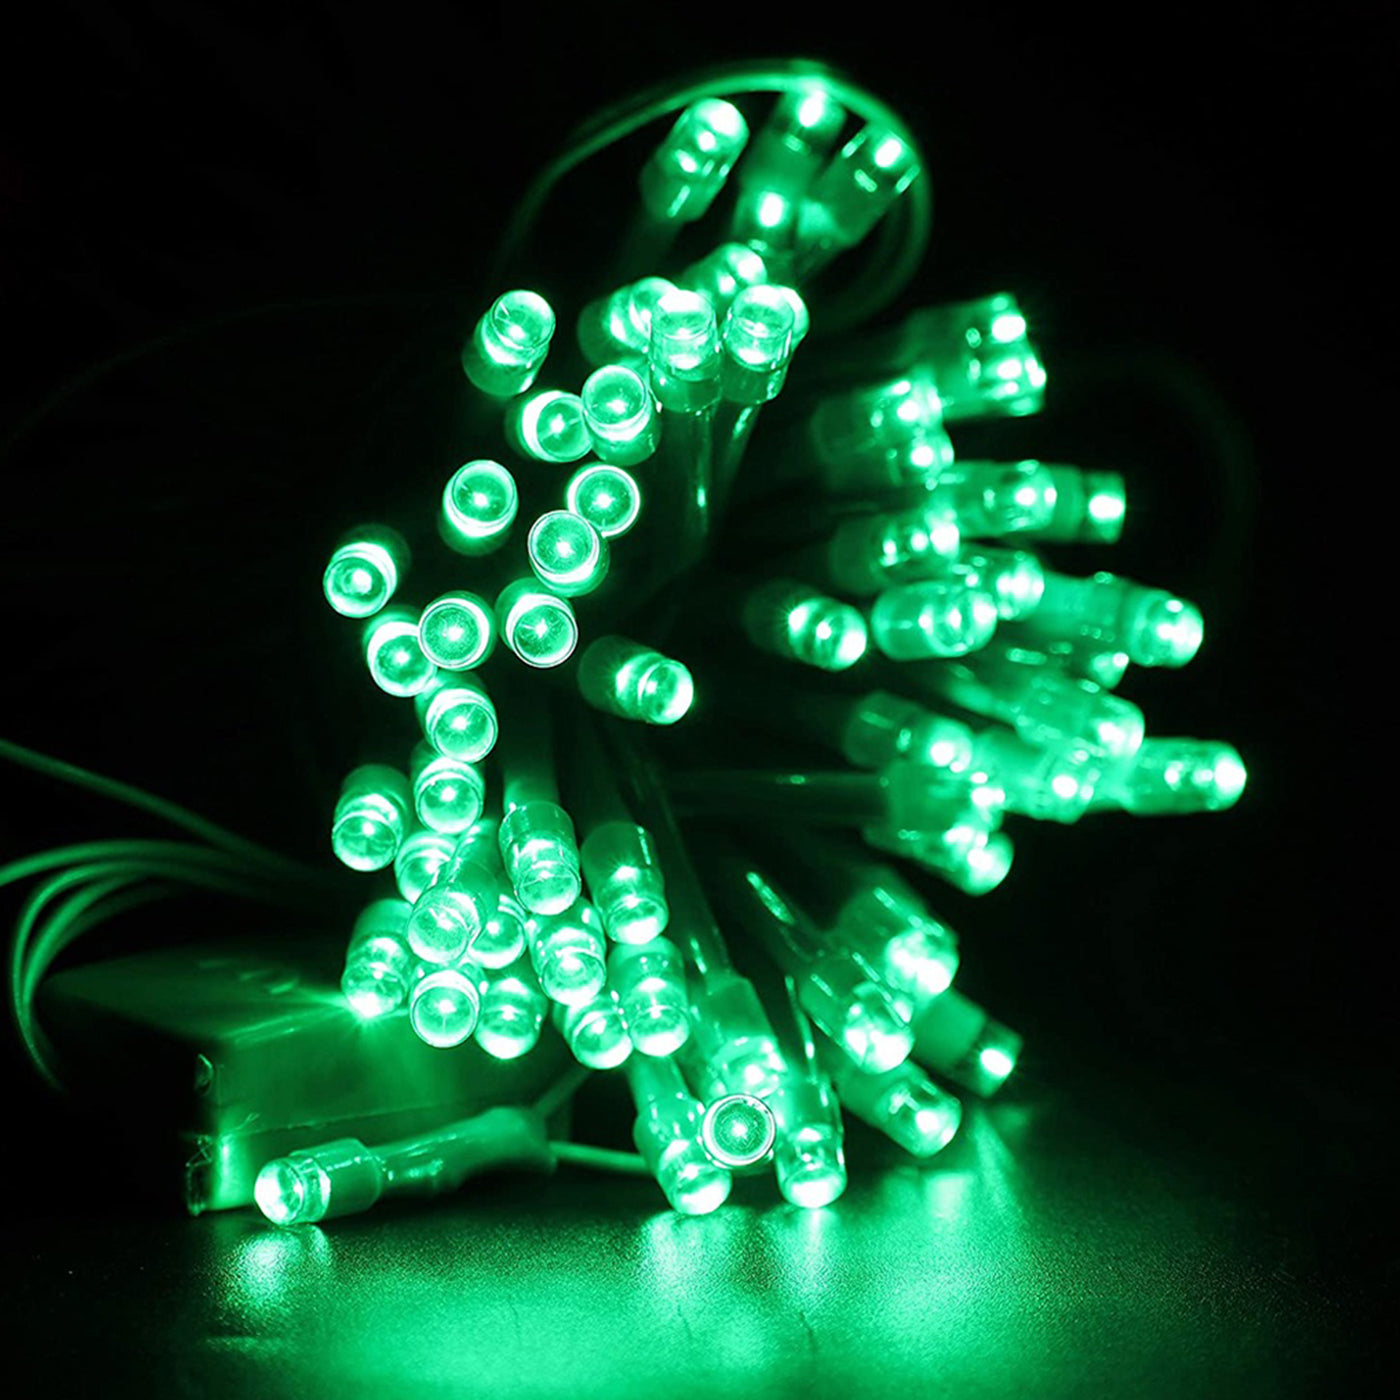 DecorTwist LED String Light for Home and Office Decor | Indoor & Outdoor Decorative Lights | Christmas | Diwali | Wedding | 15 Meter Length (Pack of 2) (Green)